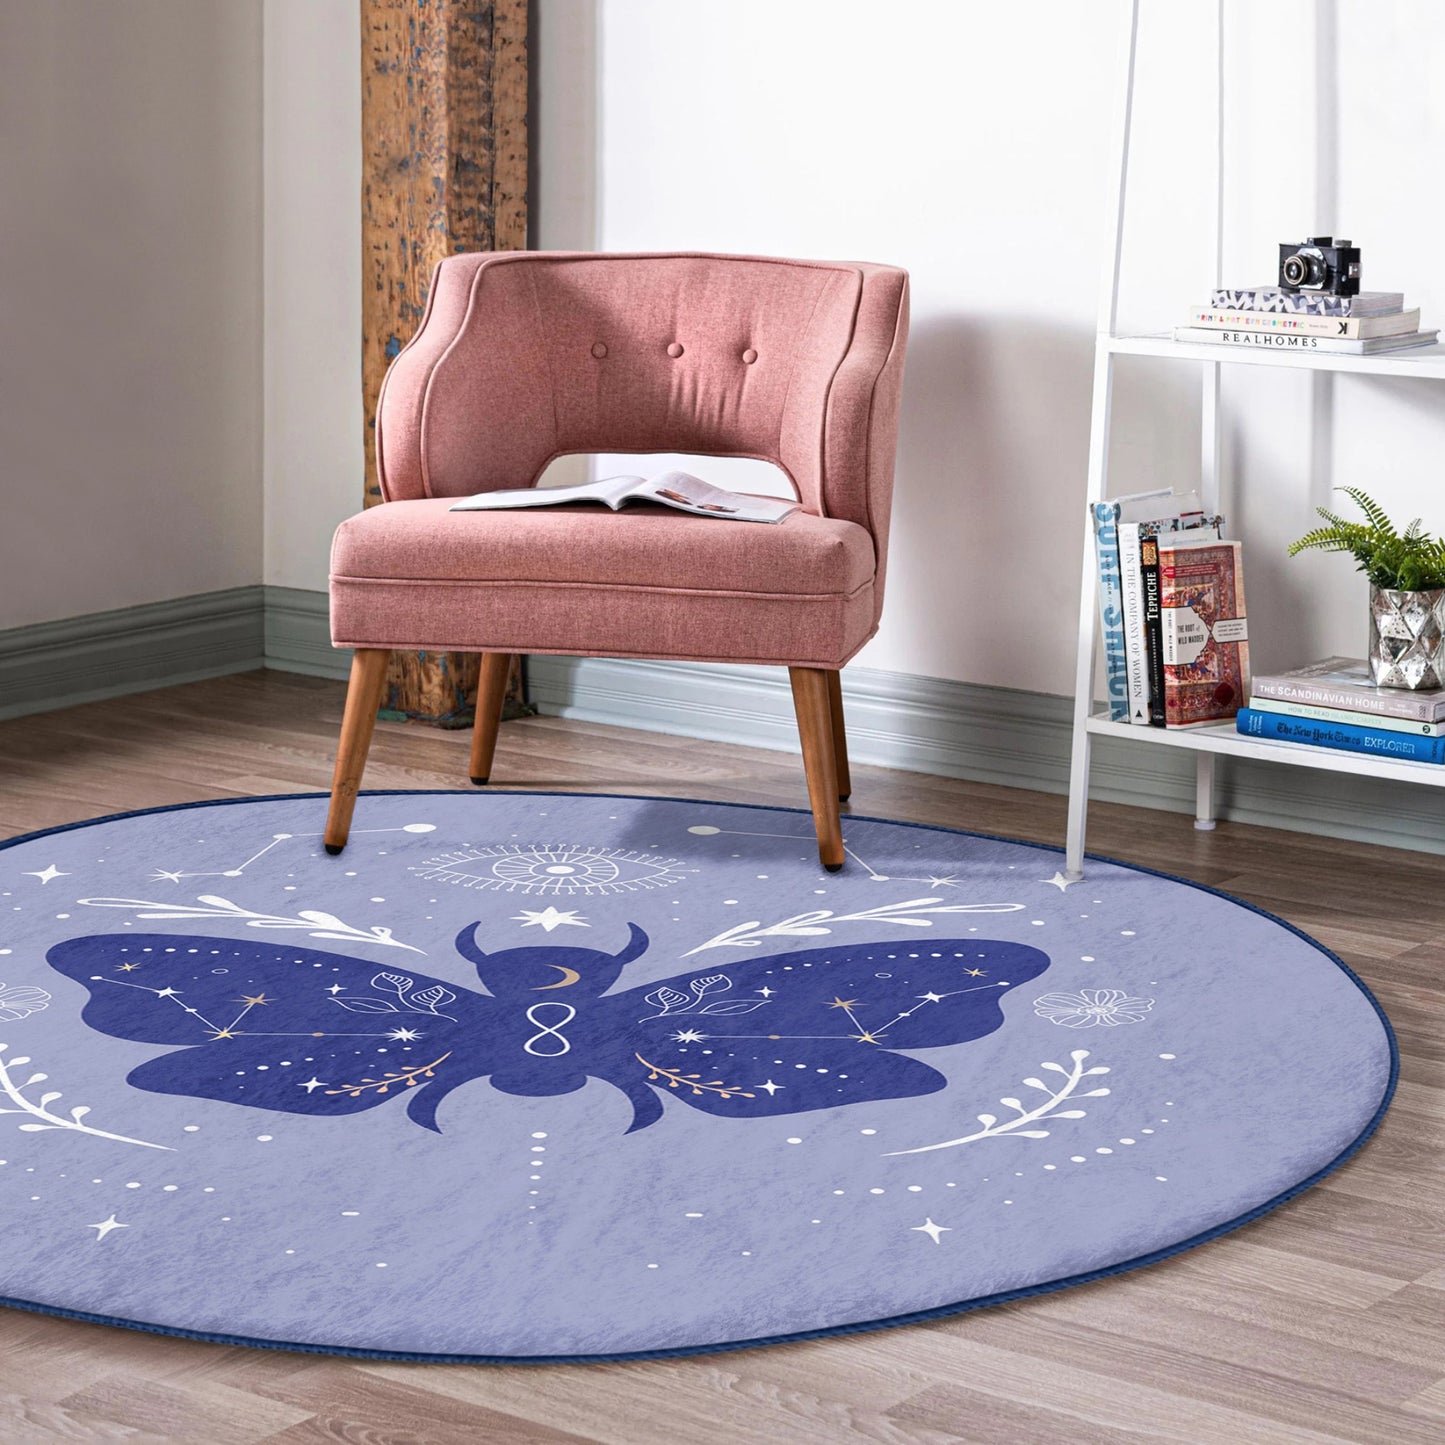 Soft & Durable Homeezone Rug - Eclectic Home Decor